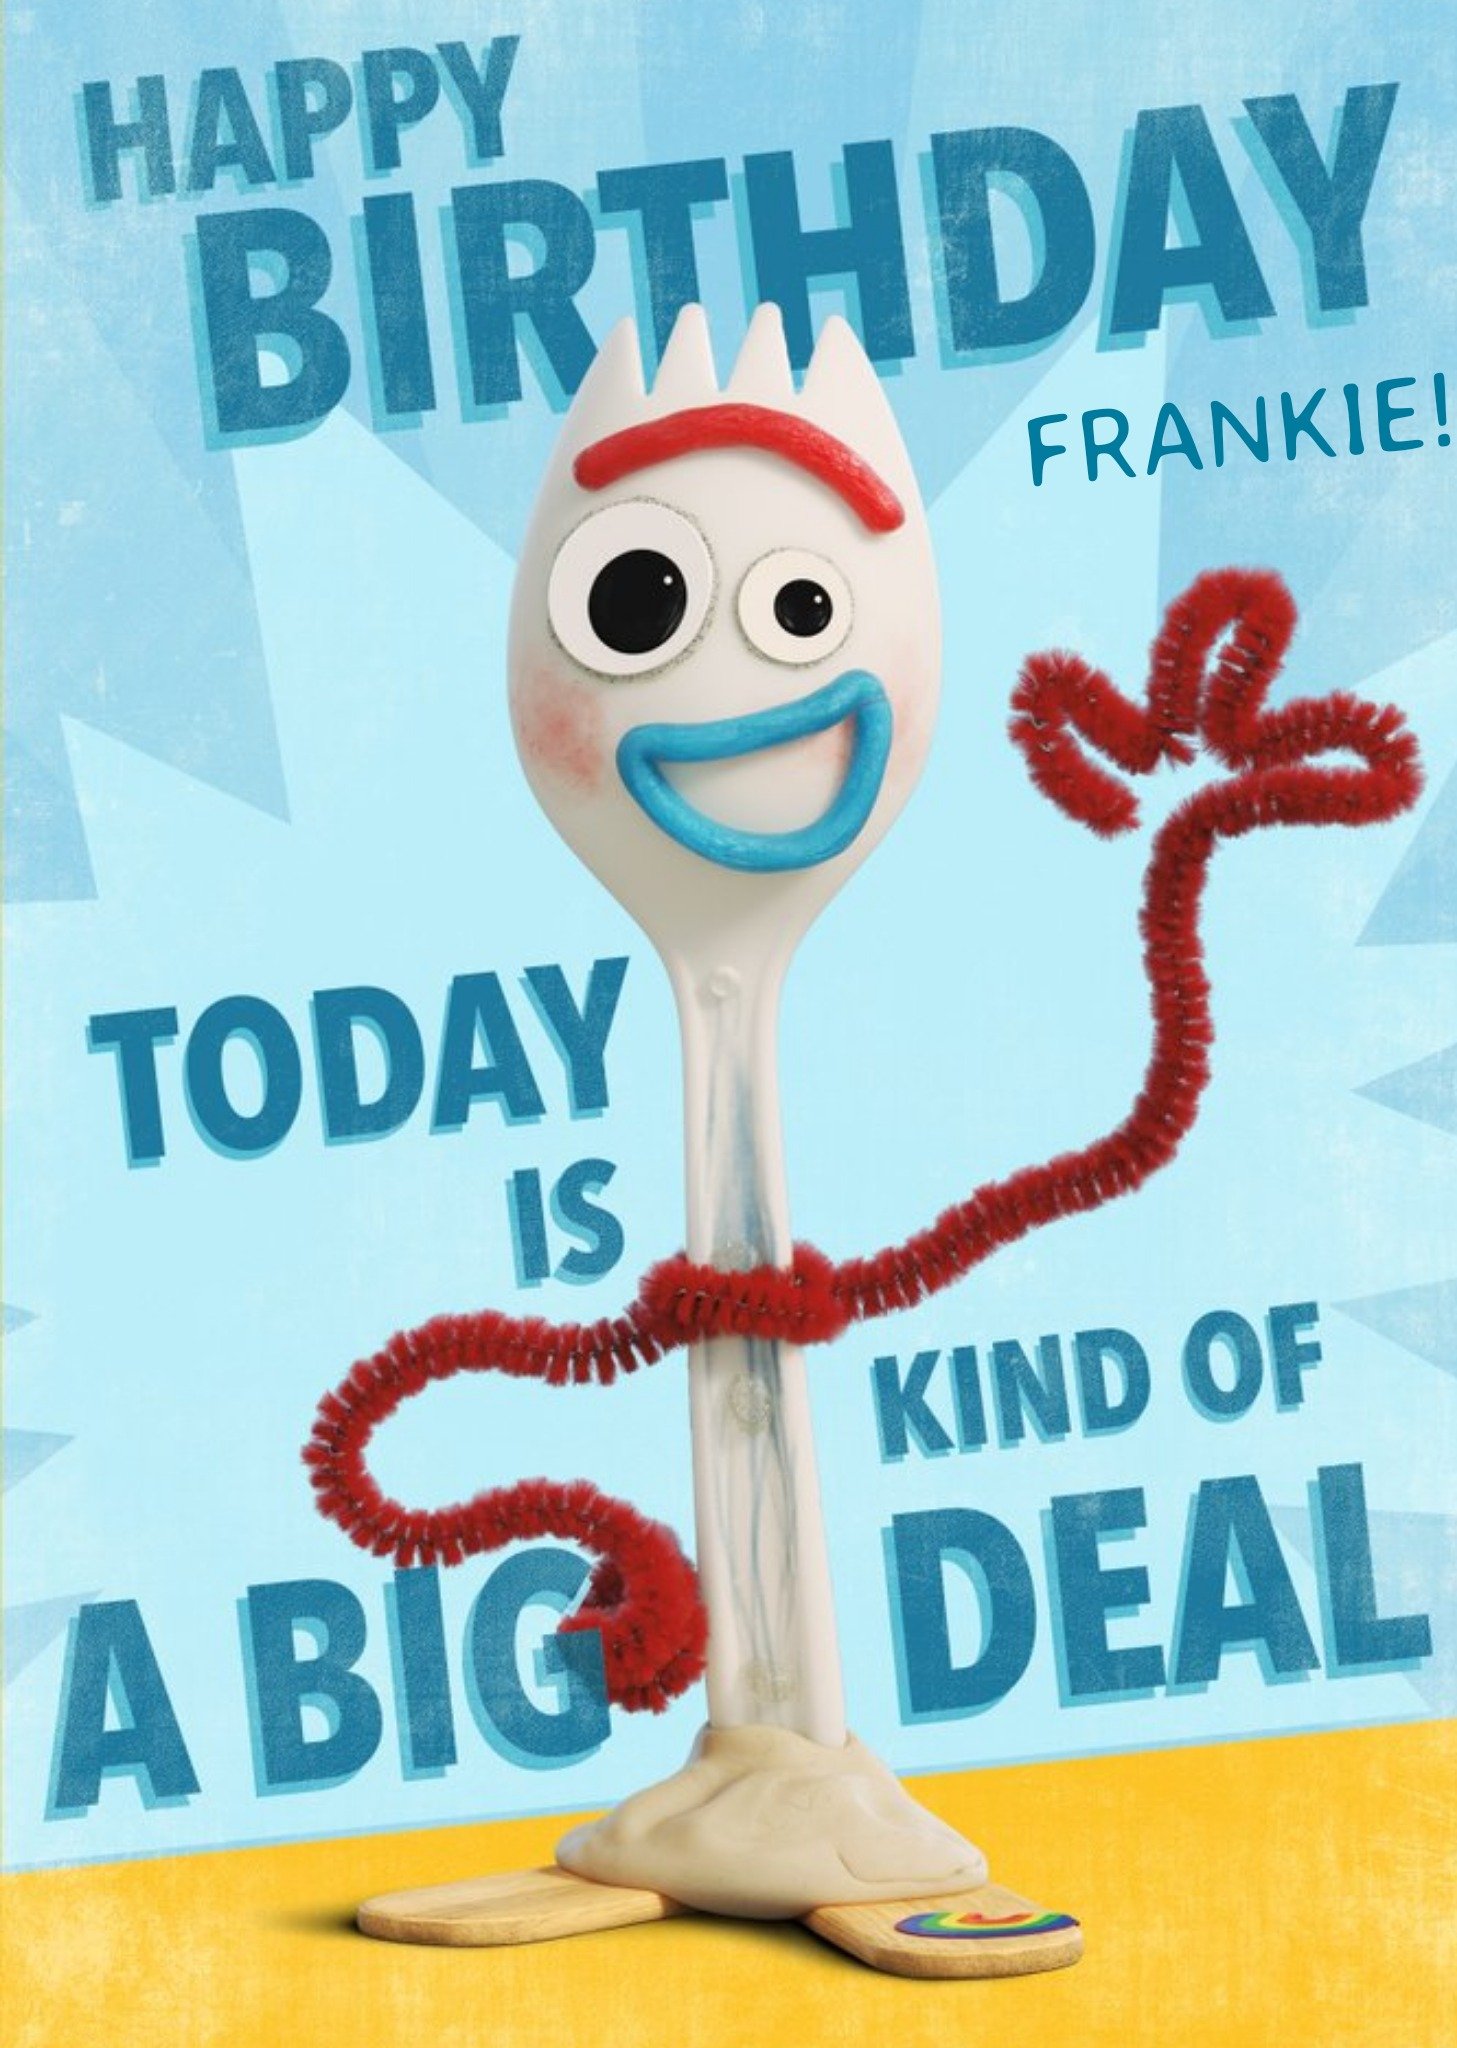 Disney Toy Story 4 Forky Birthday Card Today Is Kind Of A Big Deal Ecard